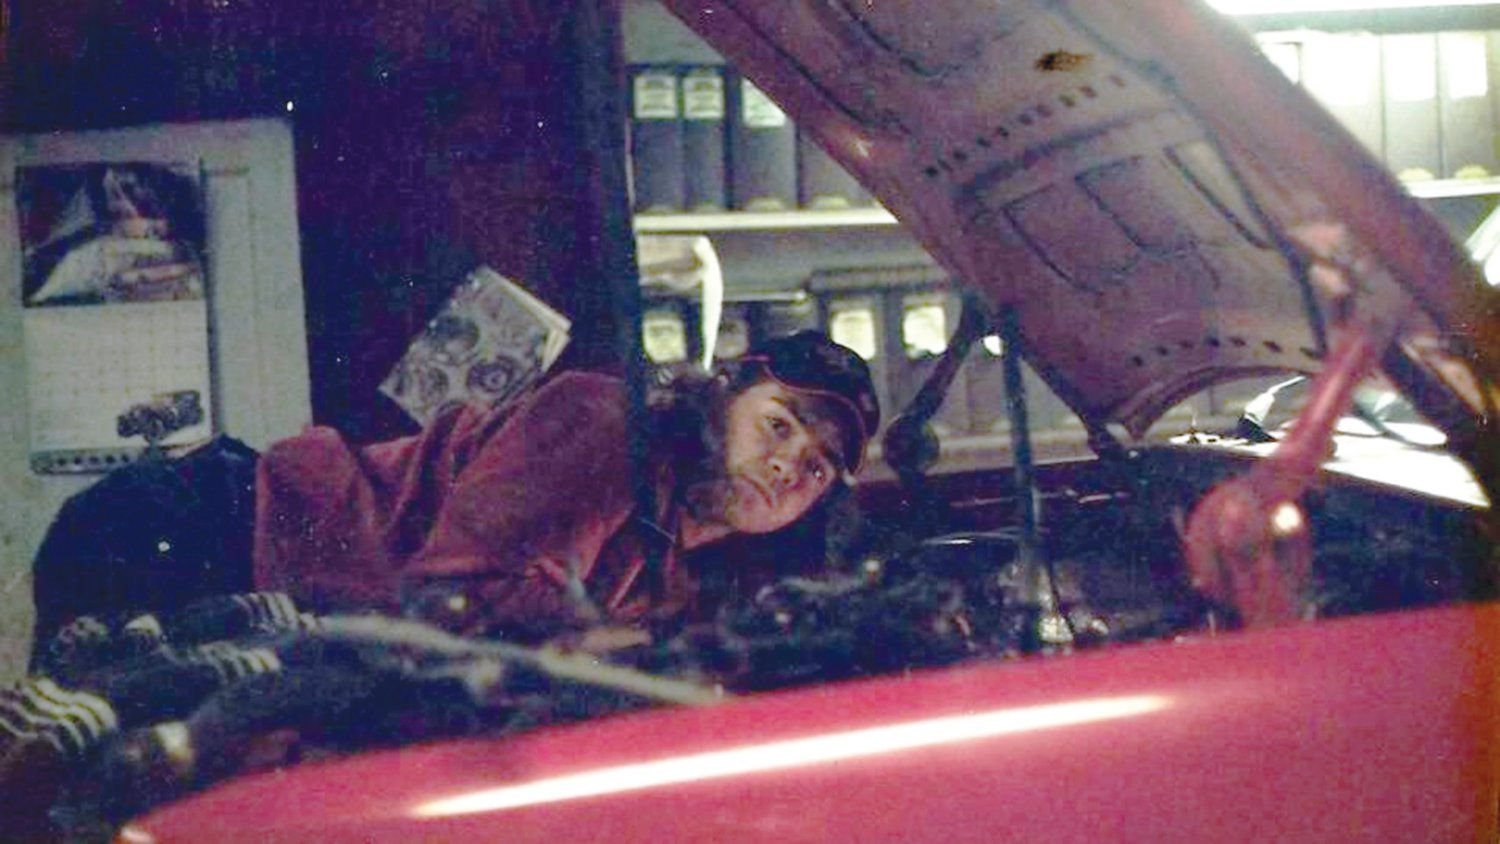 LIKE FATHER: Jay Carrera works on a car in his father’s garage in 2002. Although he won’t be taking the business over, Jay spent countless hours working side-by-side with his father.